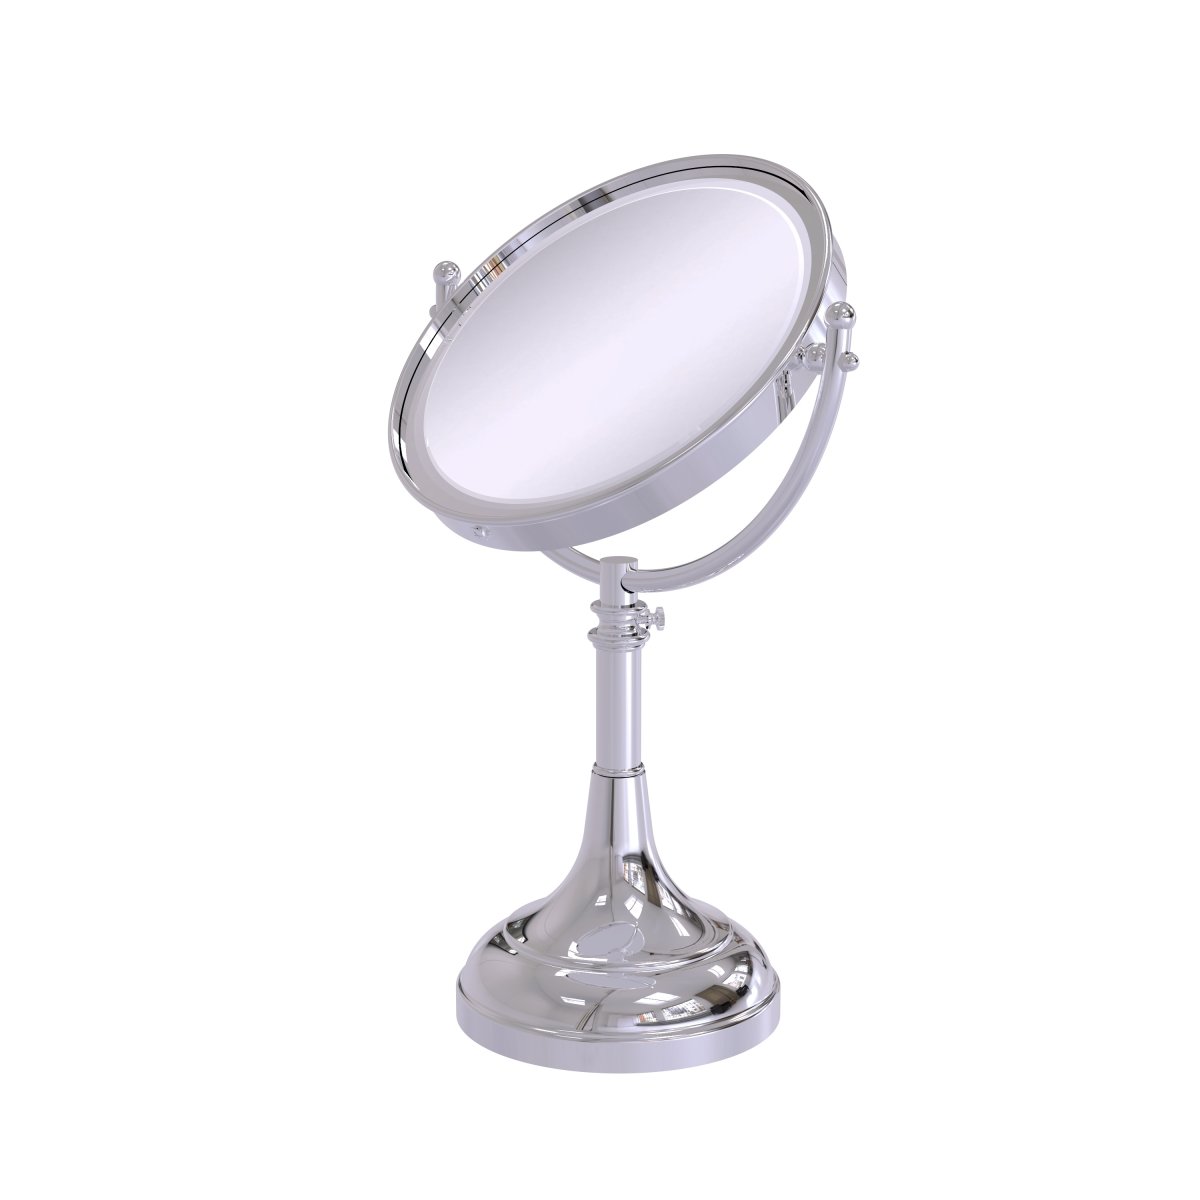 Picture of Allied Brass DM-1-2X-PC 8 in. Height Adjustable Vanity Top Make-Up Mirror 2X Magnification, Polished Chrome